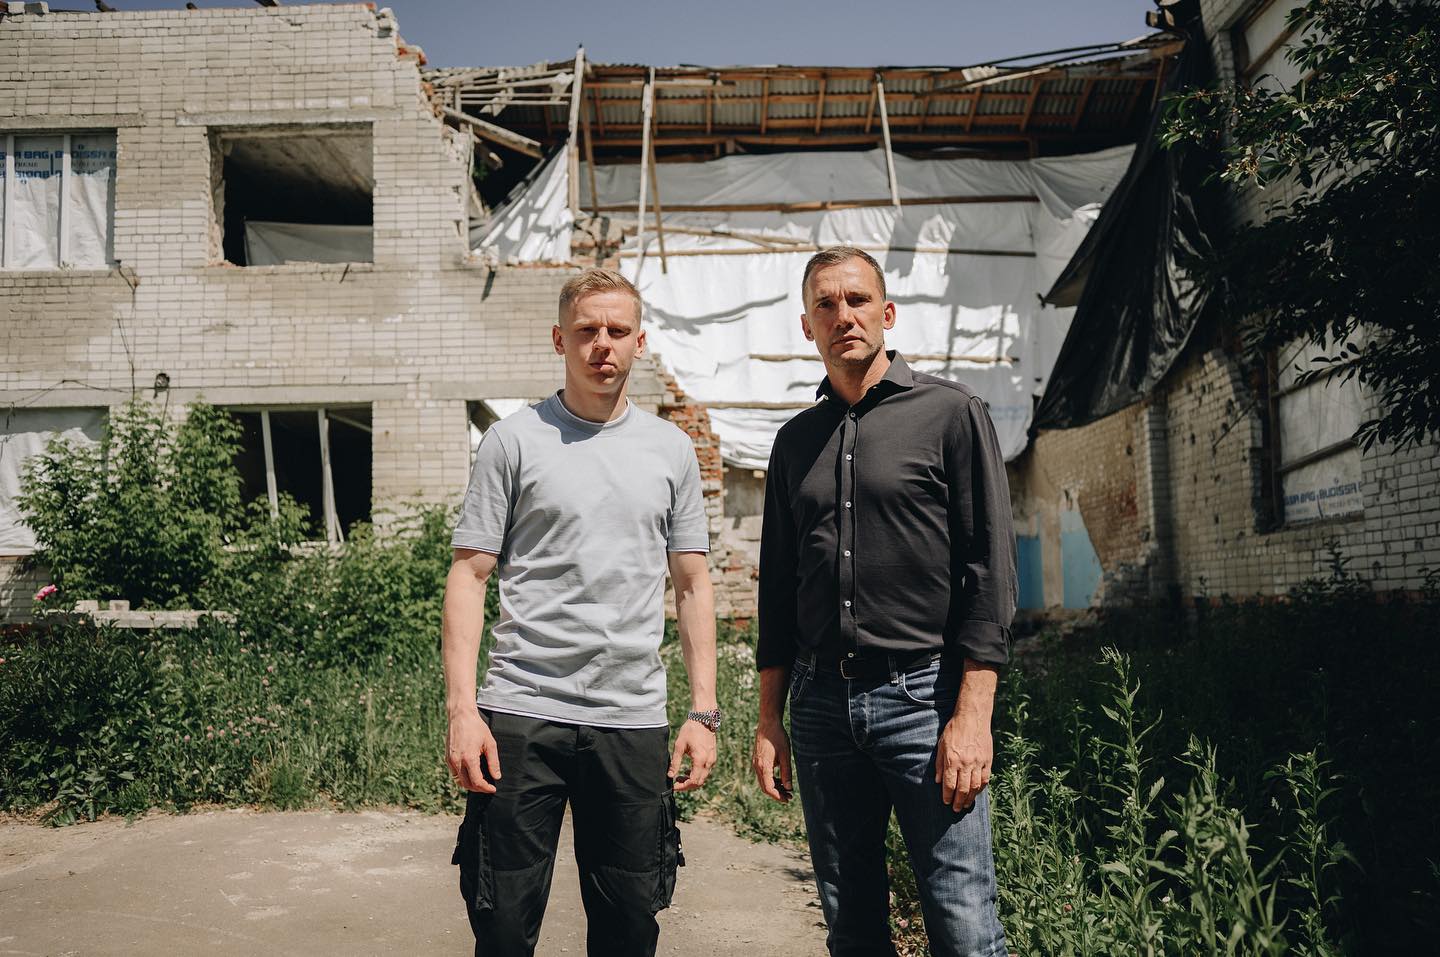 , Zinchenko visits school devastated by Russian attacks as Arsenal star signs up to captain team in Ukraine charity game